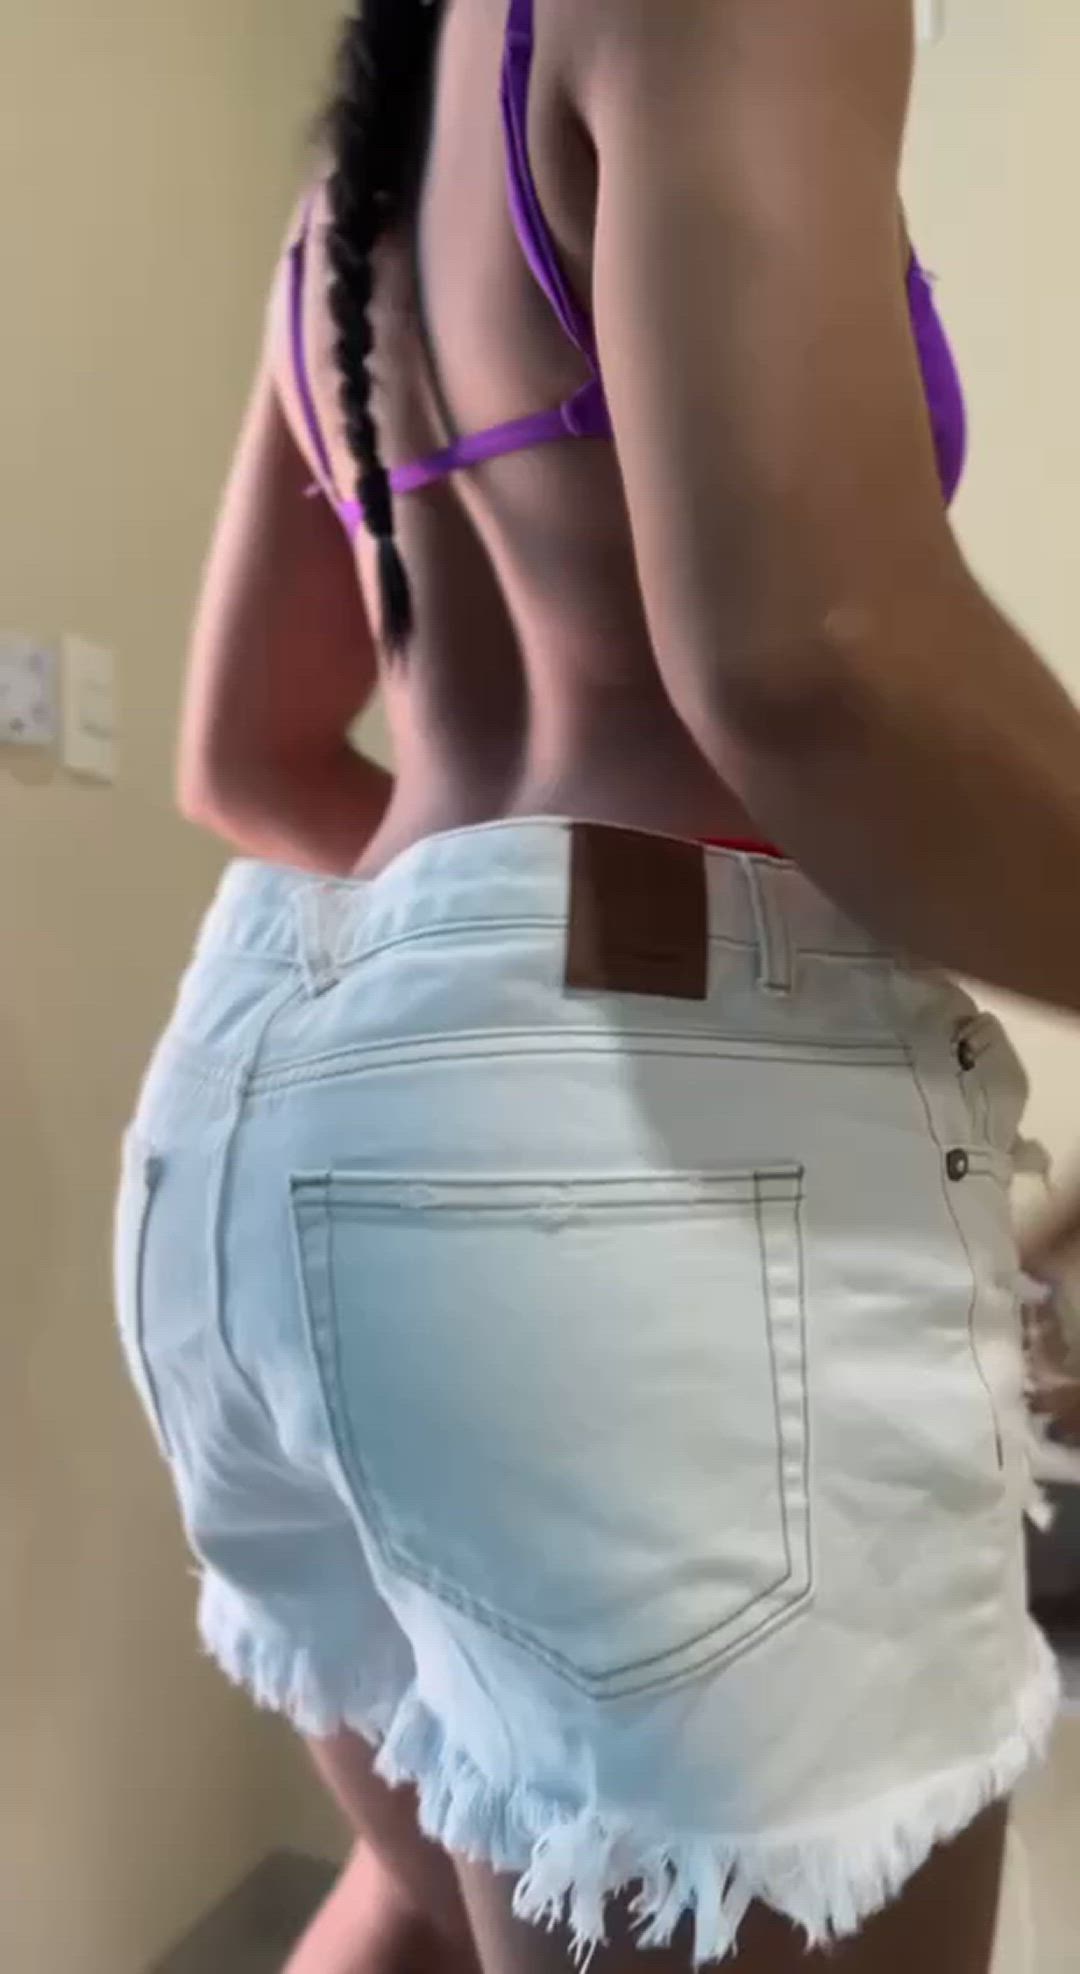 Ass porn video with onlyfans model maleja01 <strong>@malejandra1</strong>